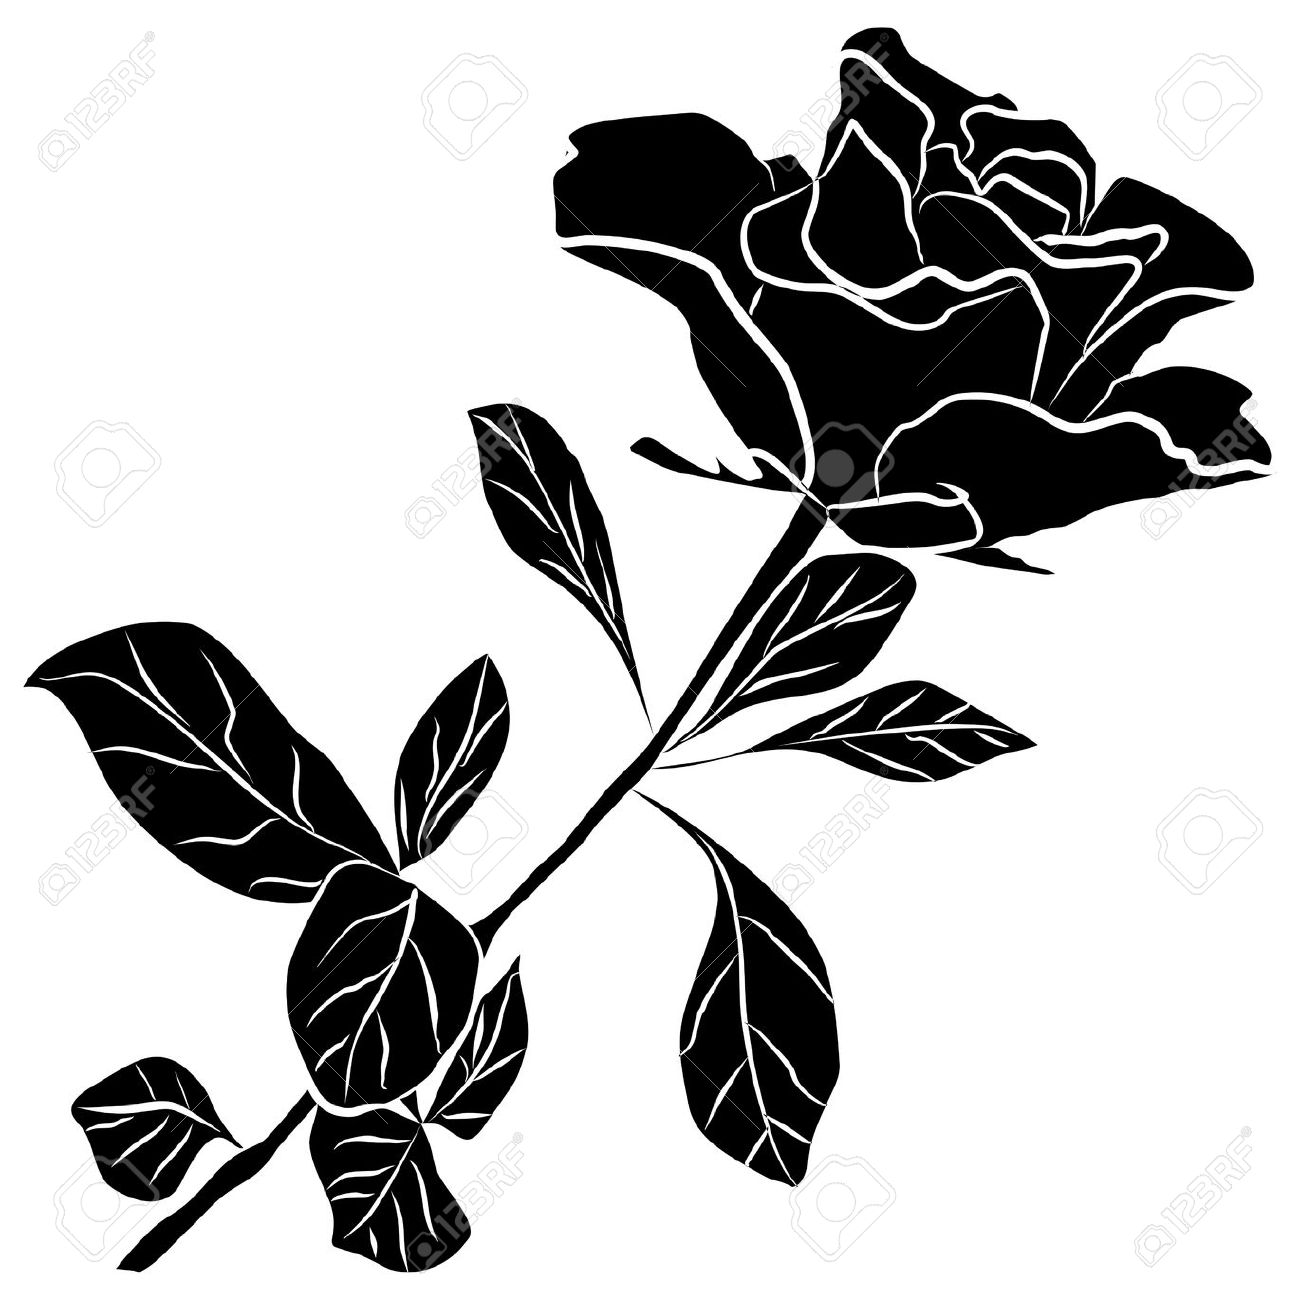 rose clipart silhouette - photo #19